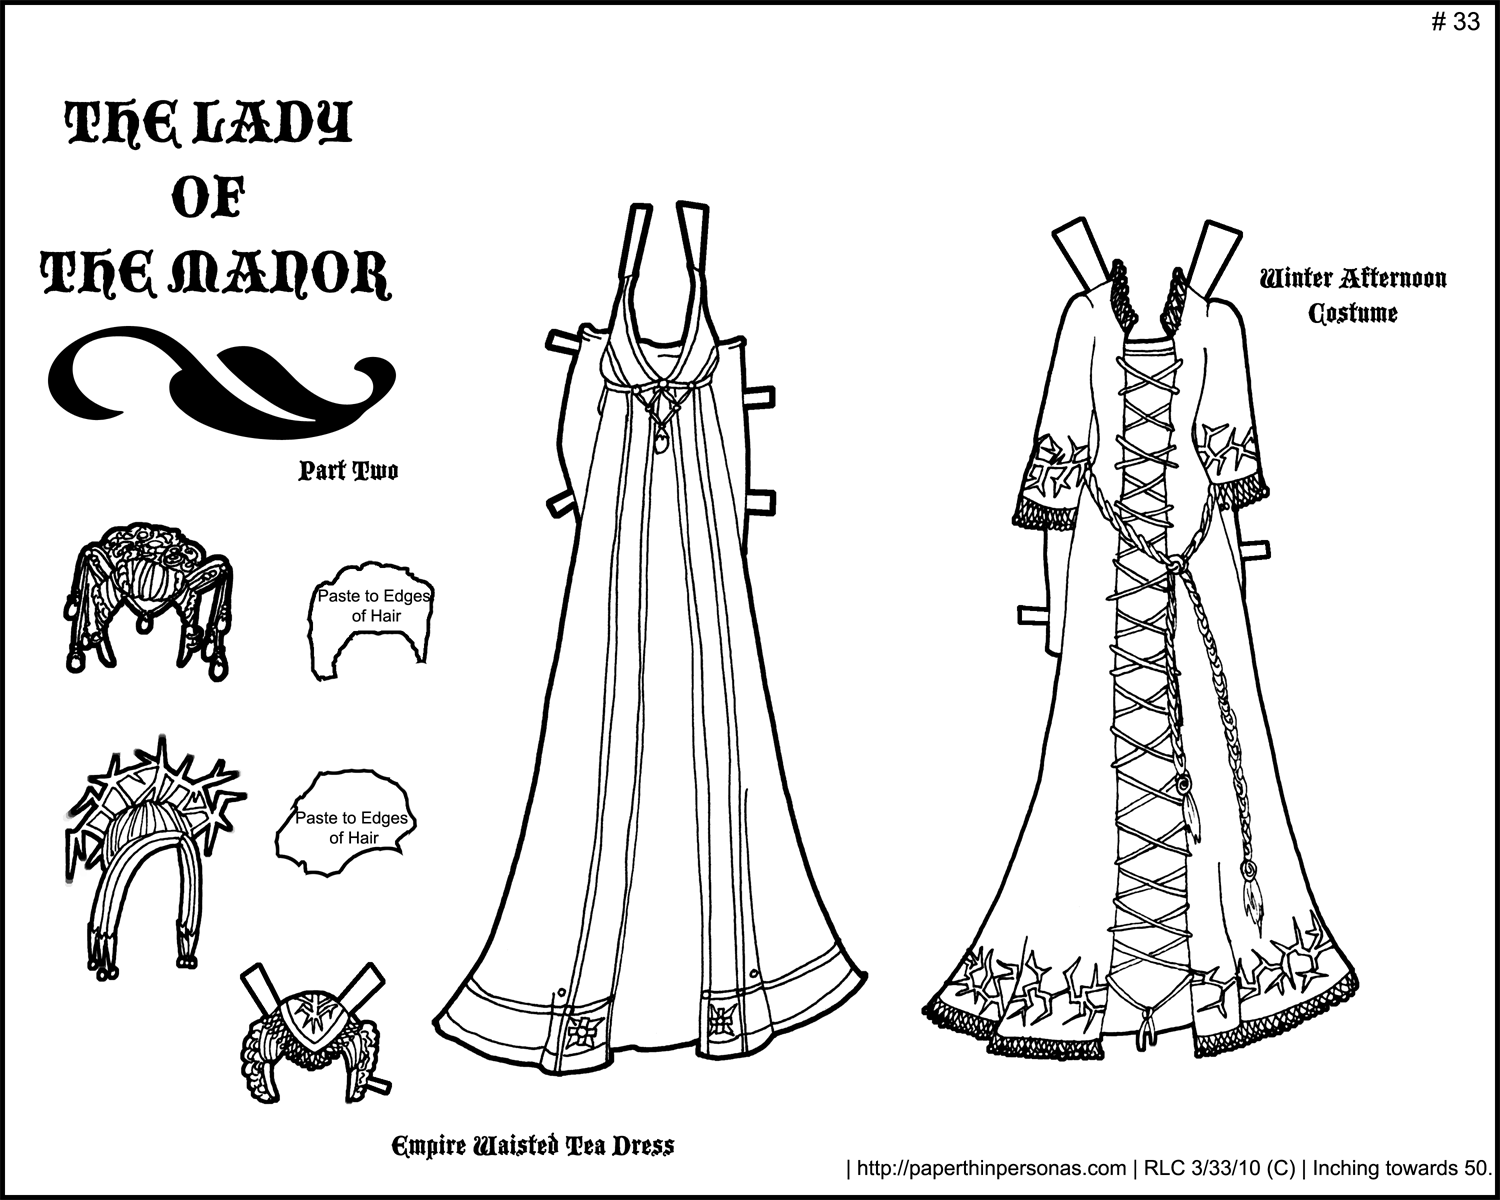 Printable Paper Doll: Lady of the Manor Part 2 • Paper Thin Personas